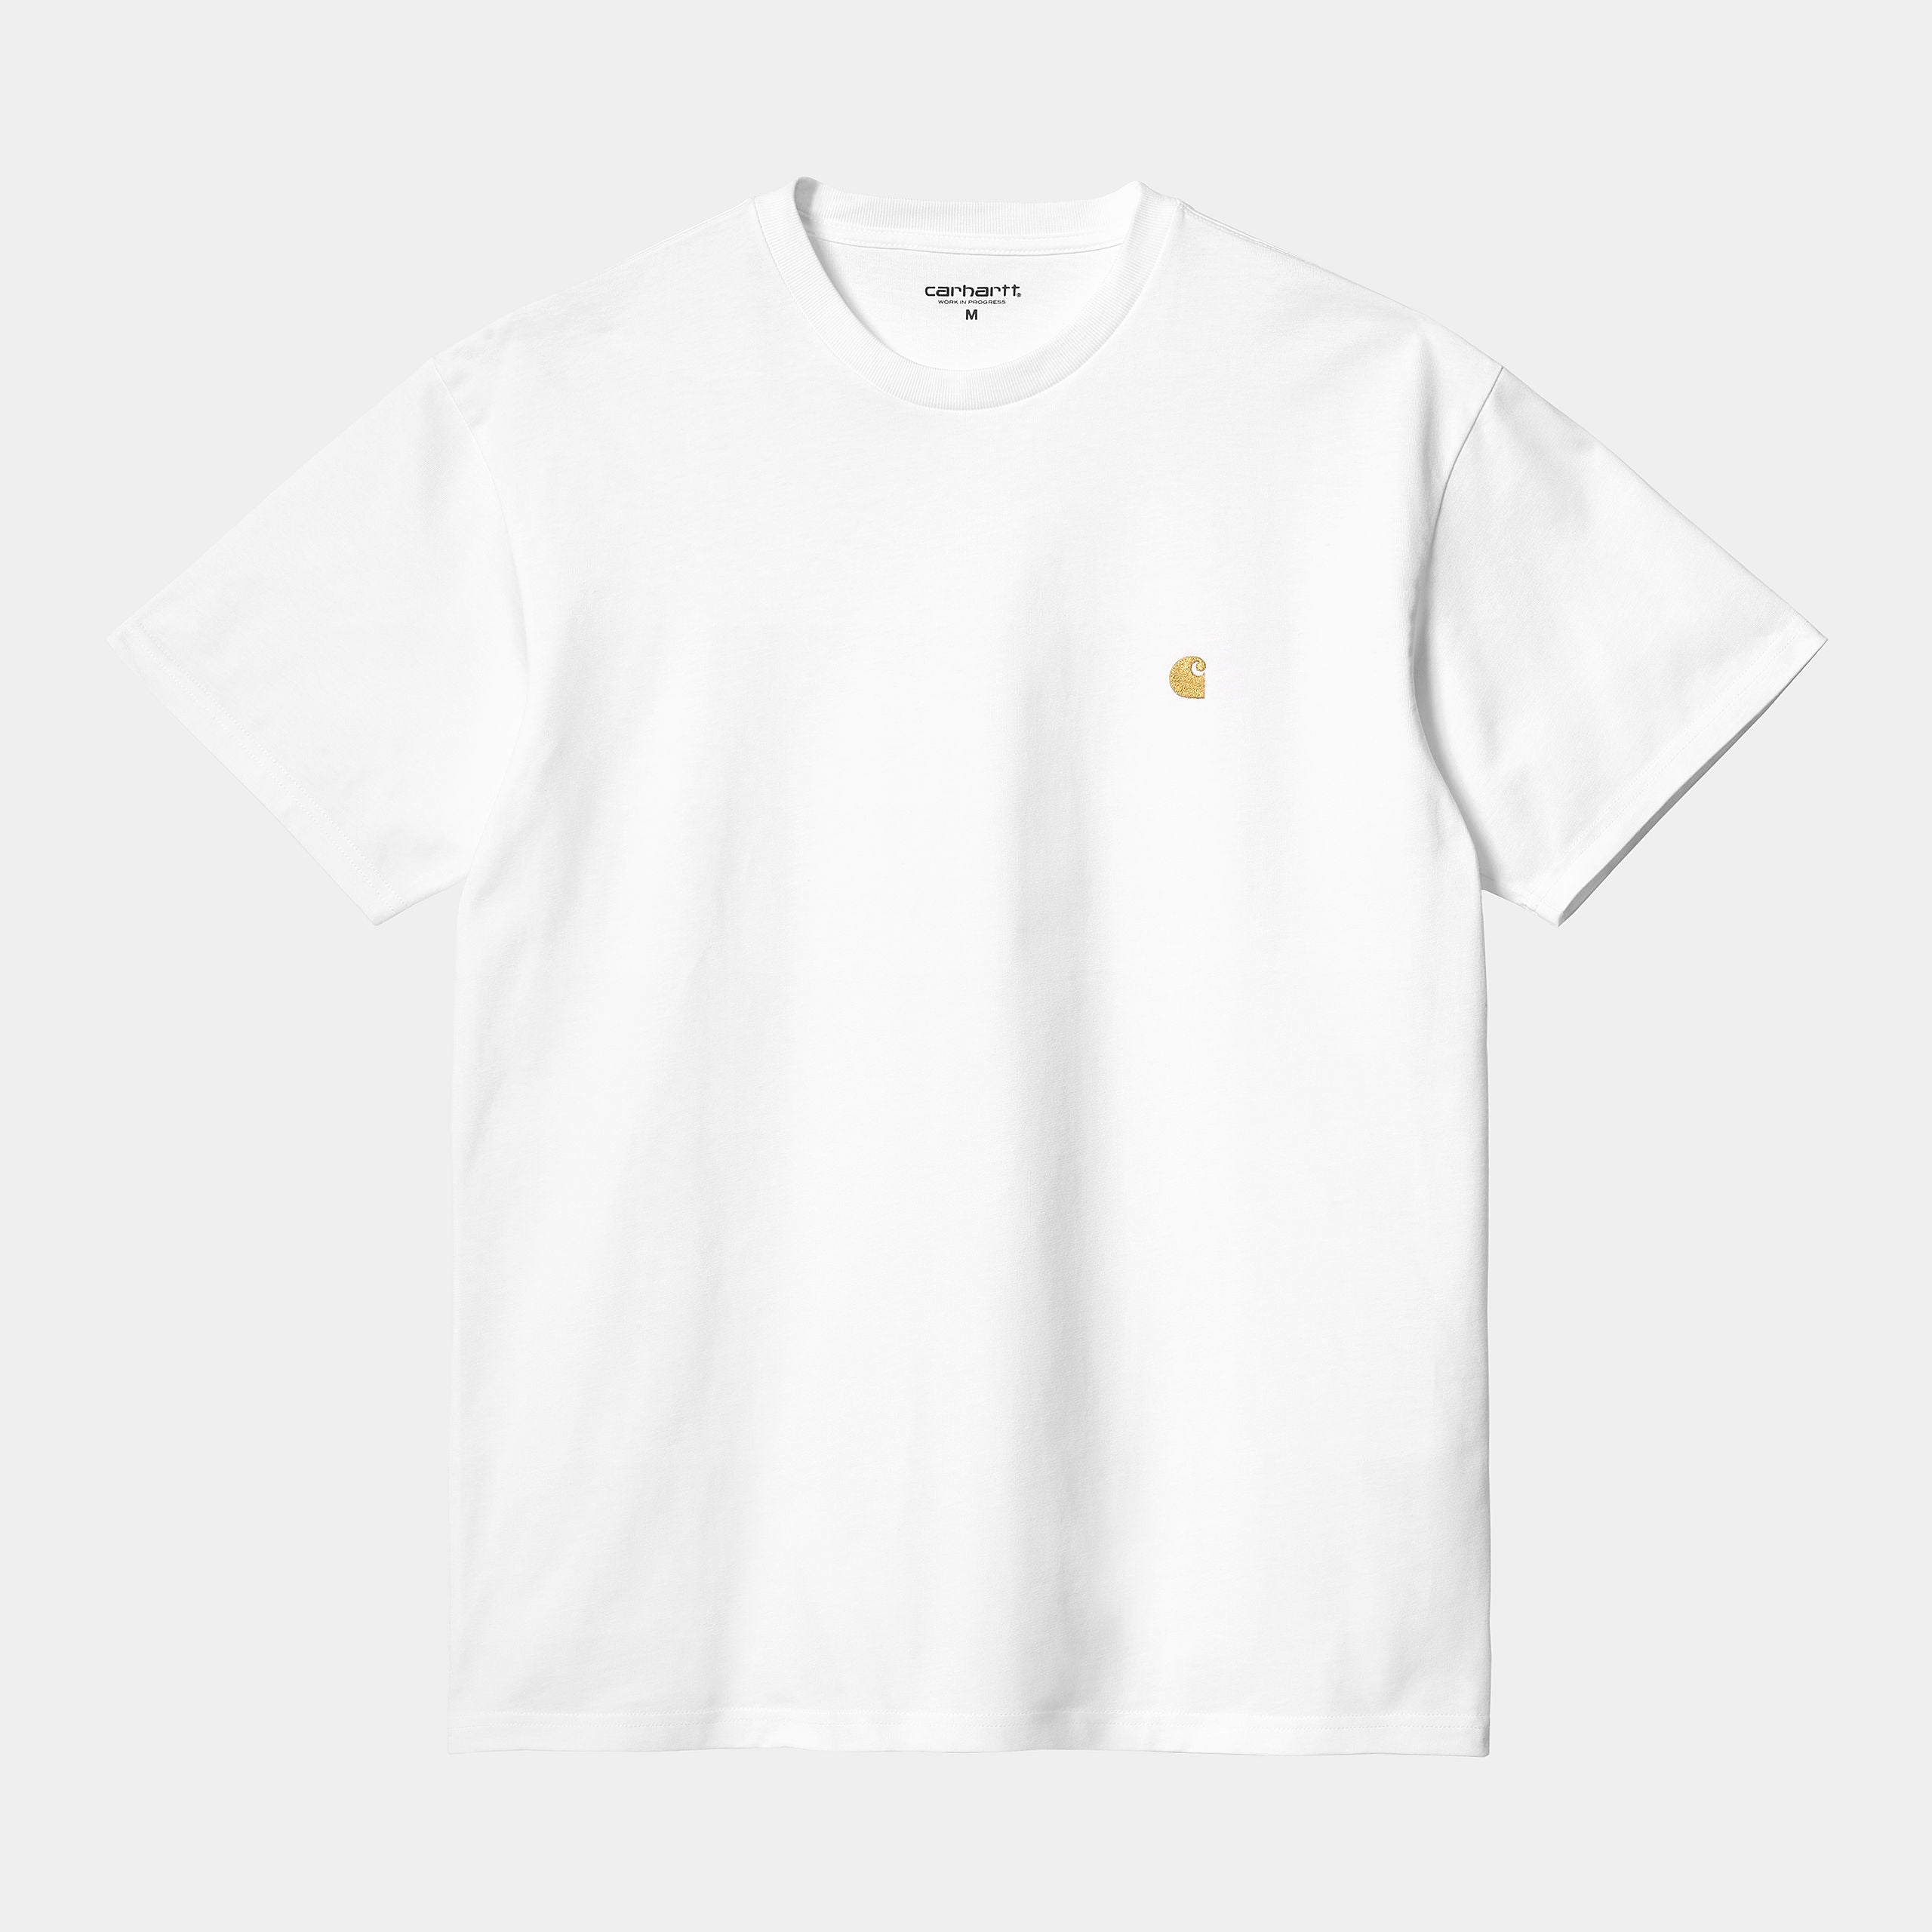 Carhartt WIP S/S Chase T-Shirt White/Gold S M L XL